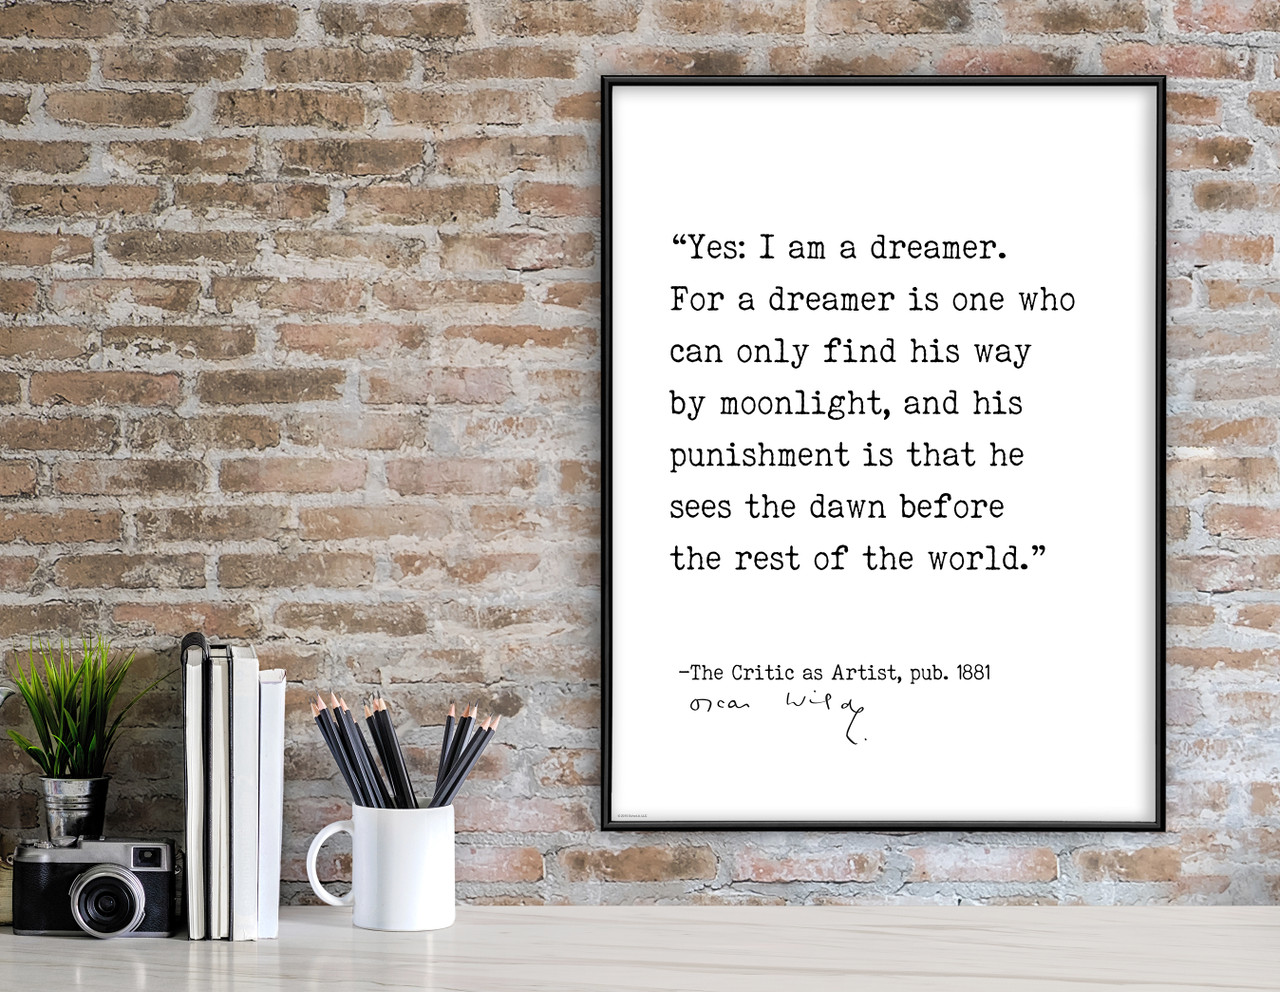 Sylvia Plath Quote the Bell Jar Print, Book Lovers Gifts, Digital Download  Print, I Am, I Am, I Am 